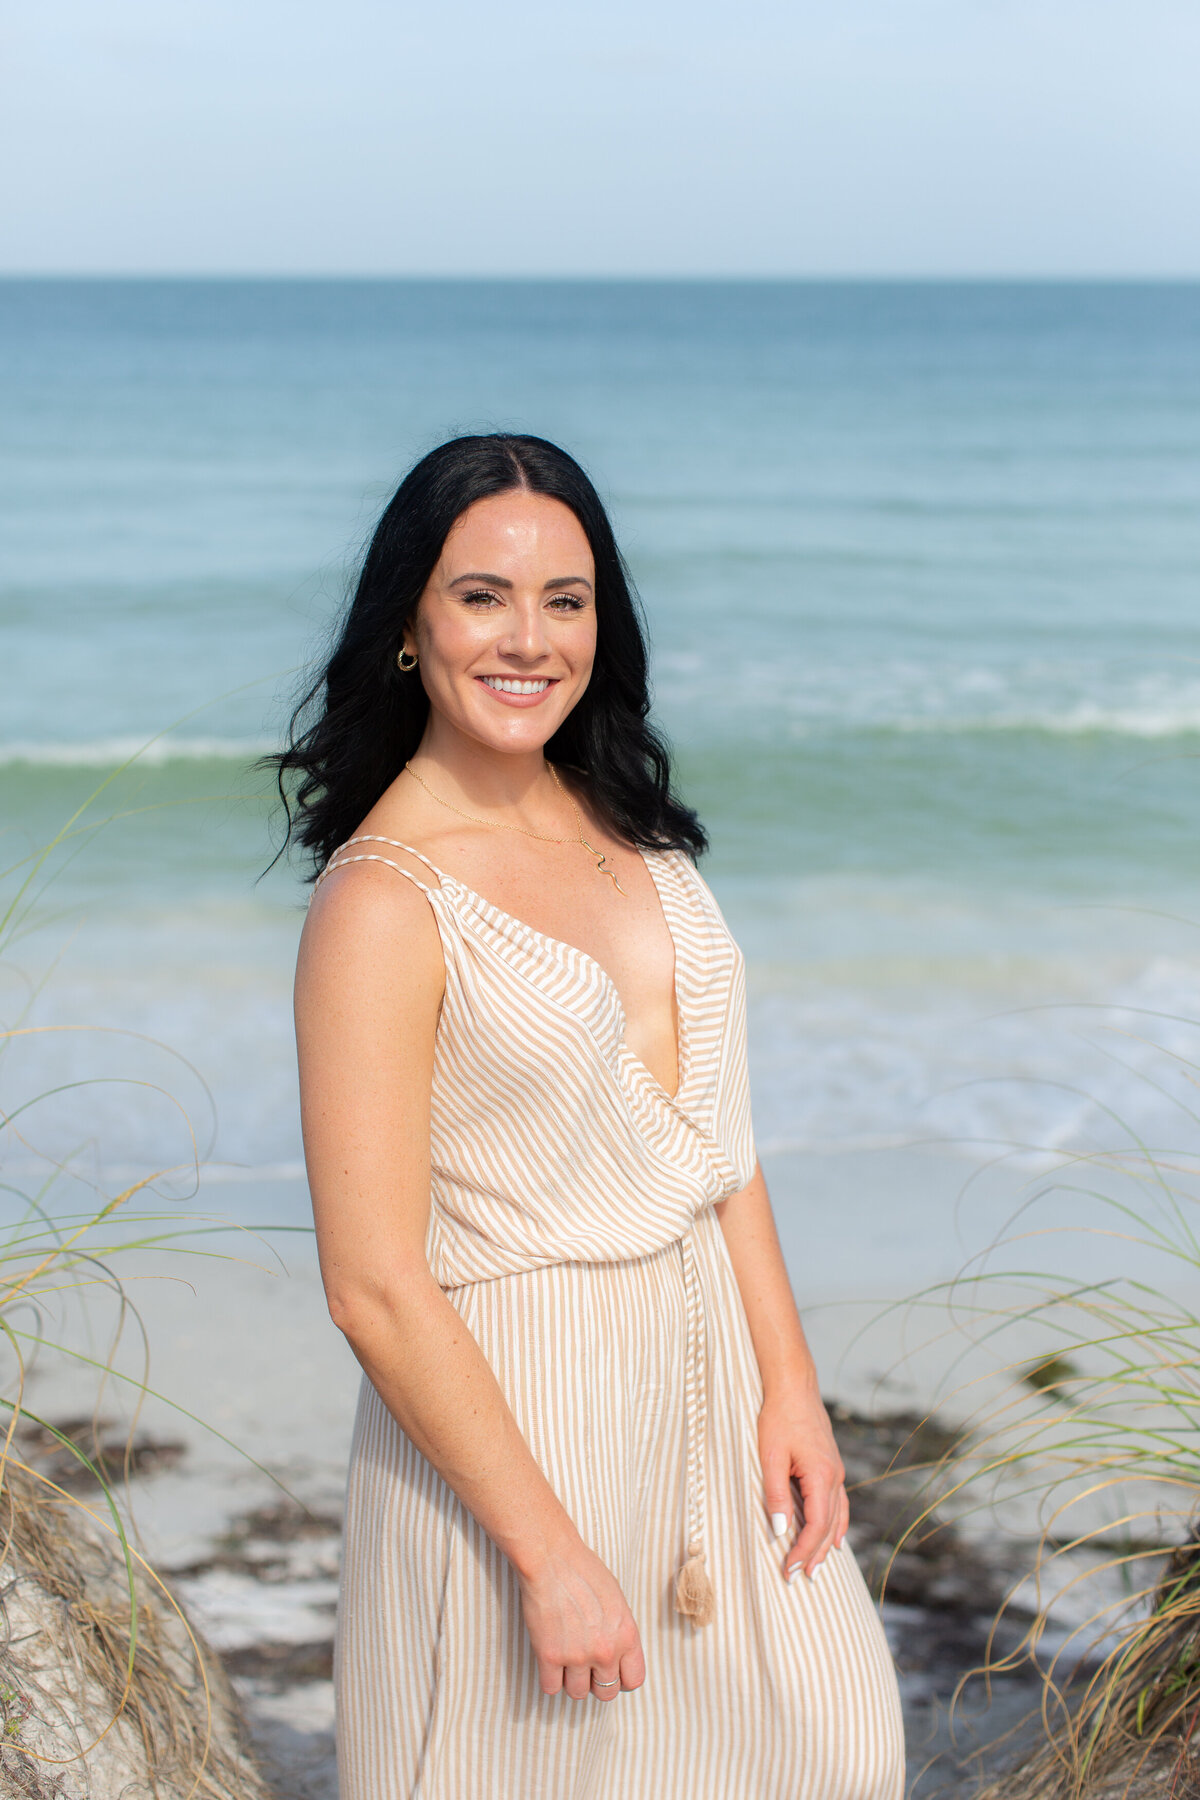 Meaghan-Health-Coach-Brand-Photography-St-Pete-23